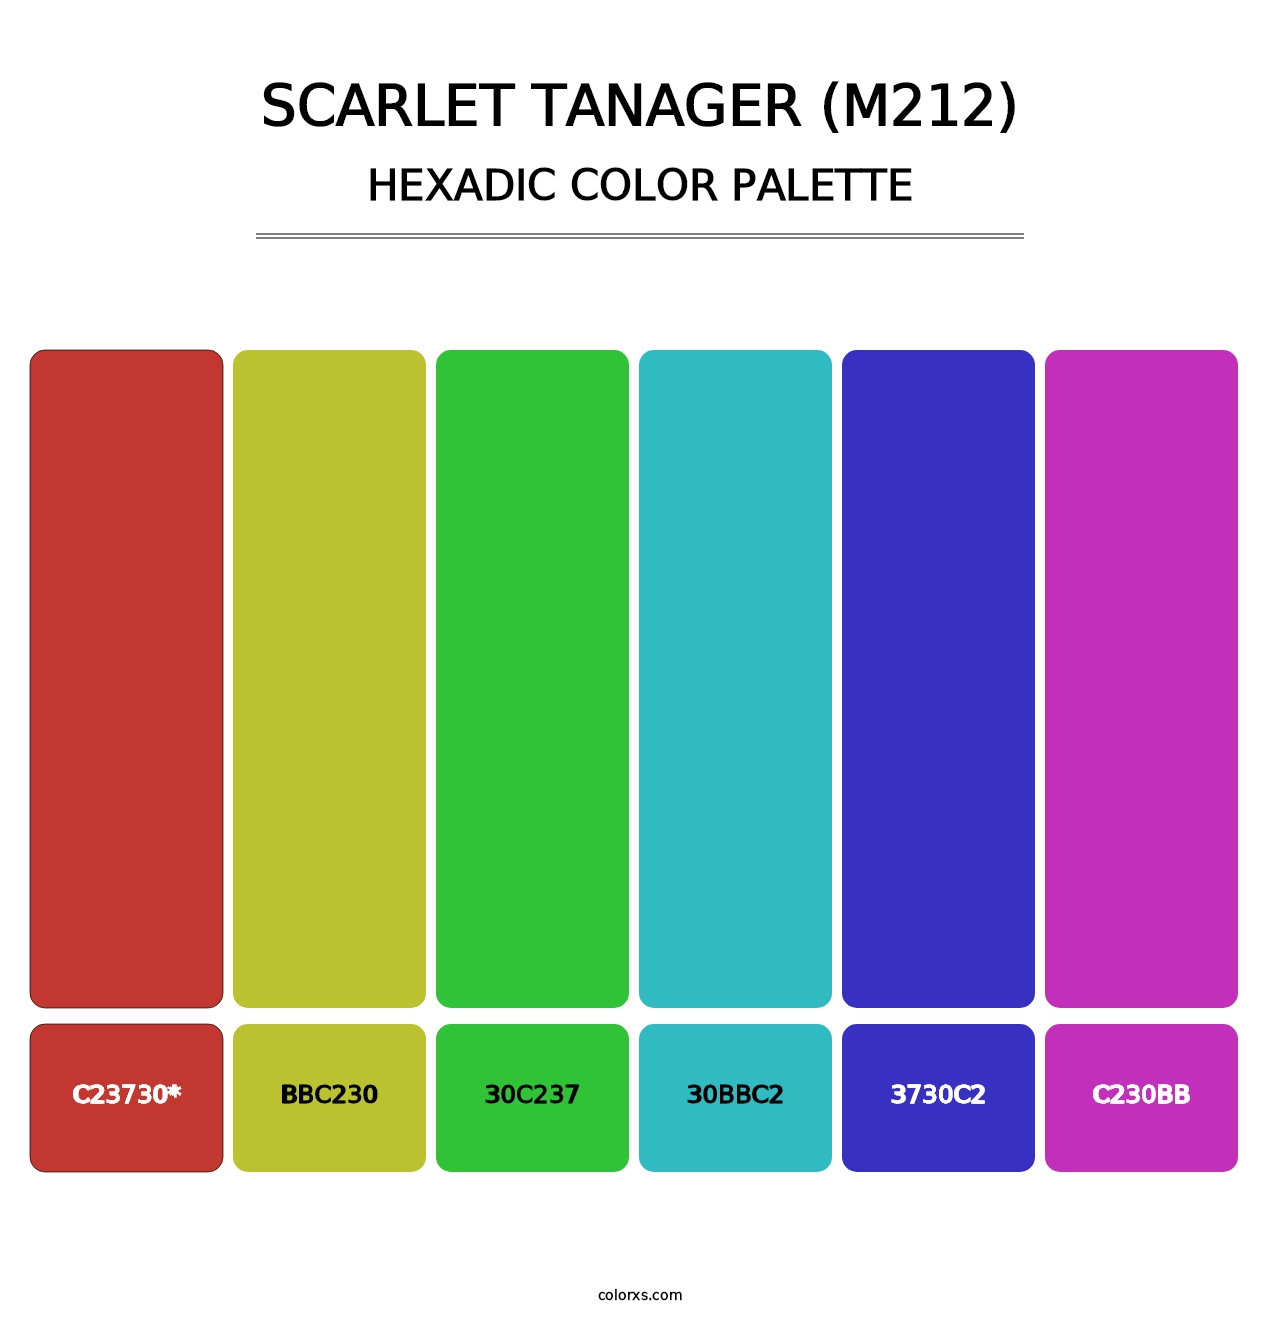 Scarlet Tanager (M212) - Hexadic Color Palette